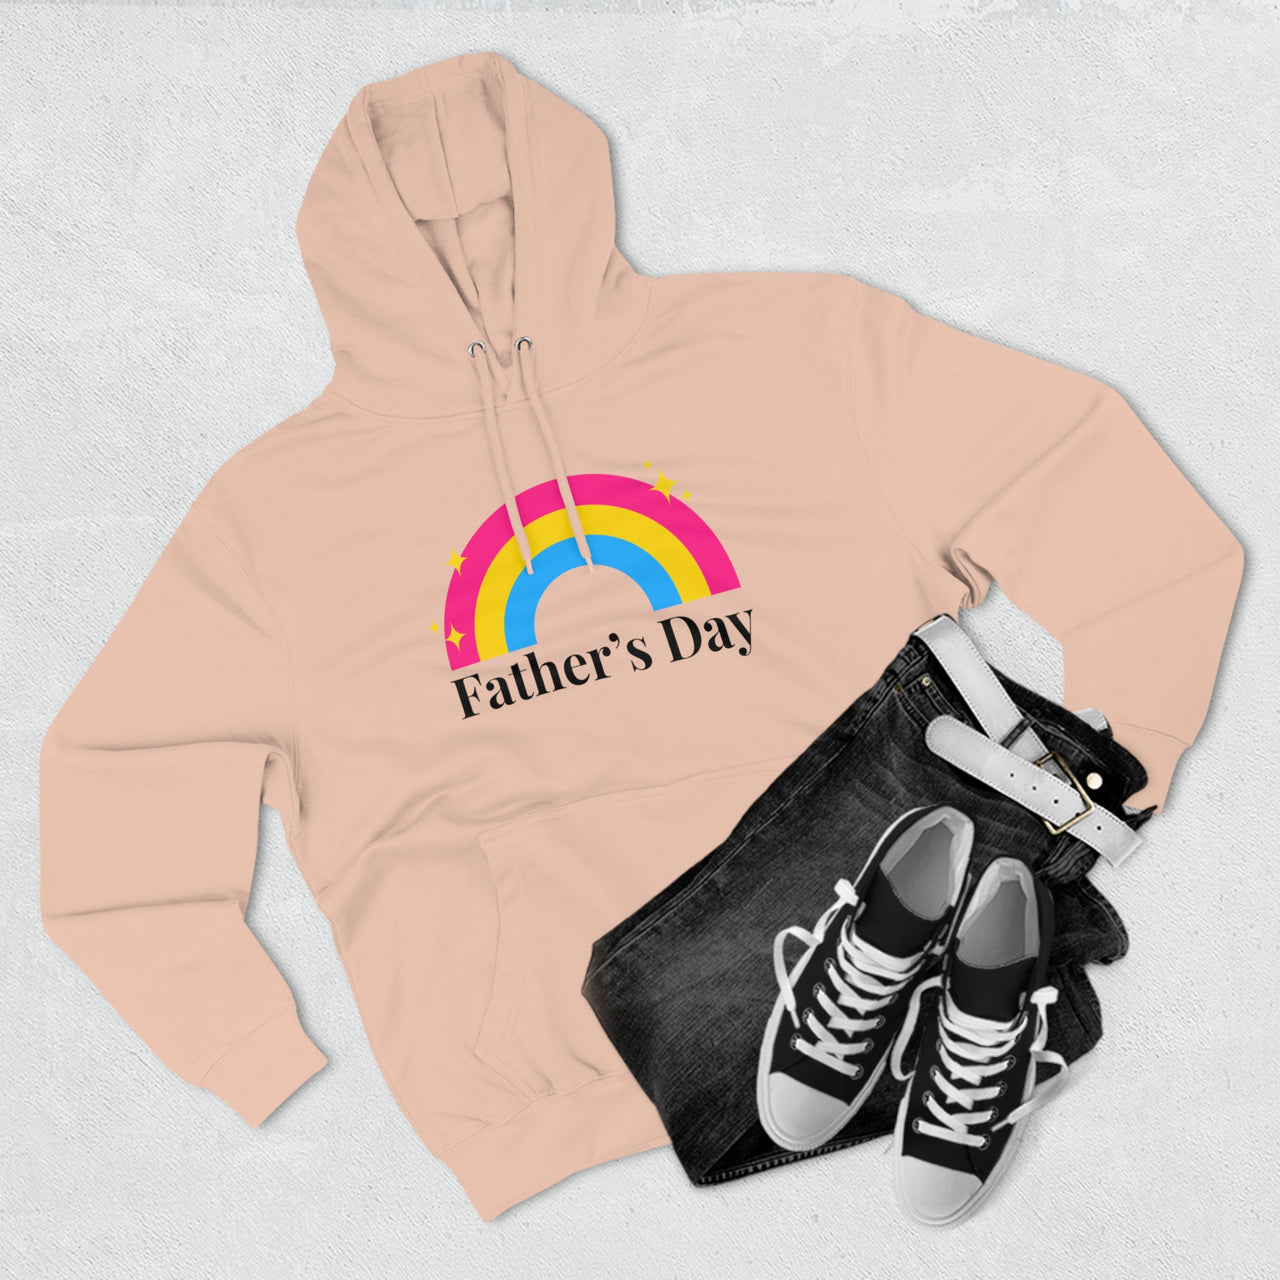 Pansexual Pride Flag Unisex Premium Pullover Hoodie - Father's Day Printify